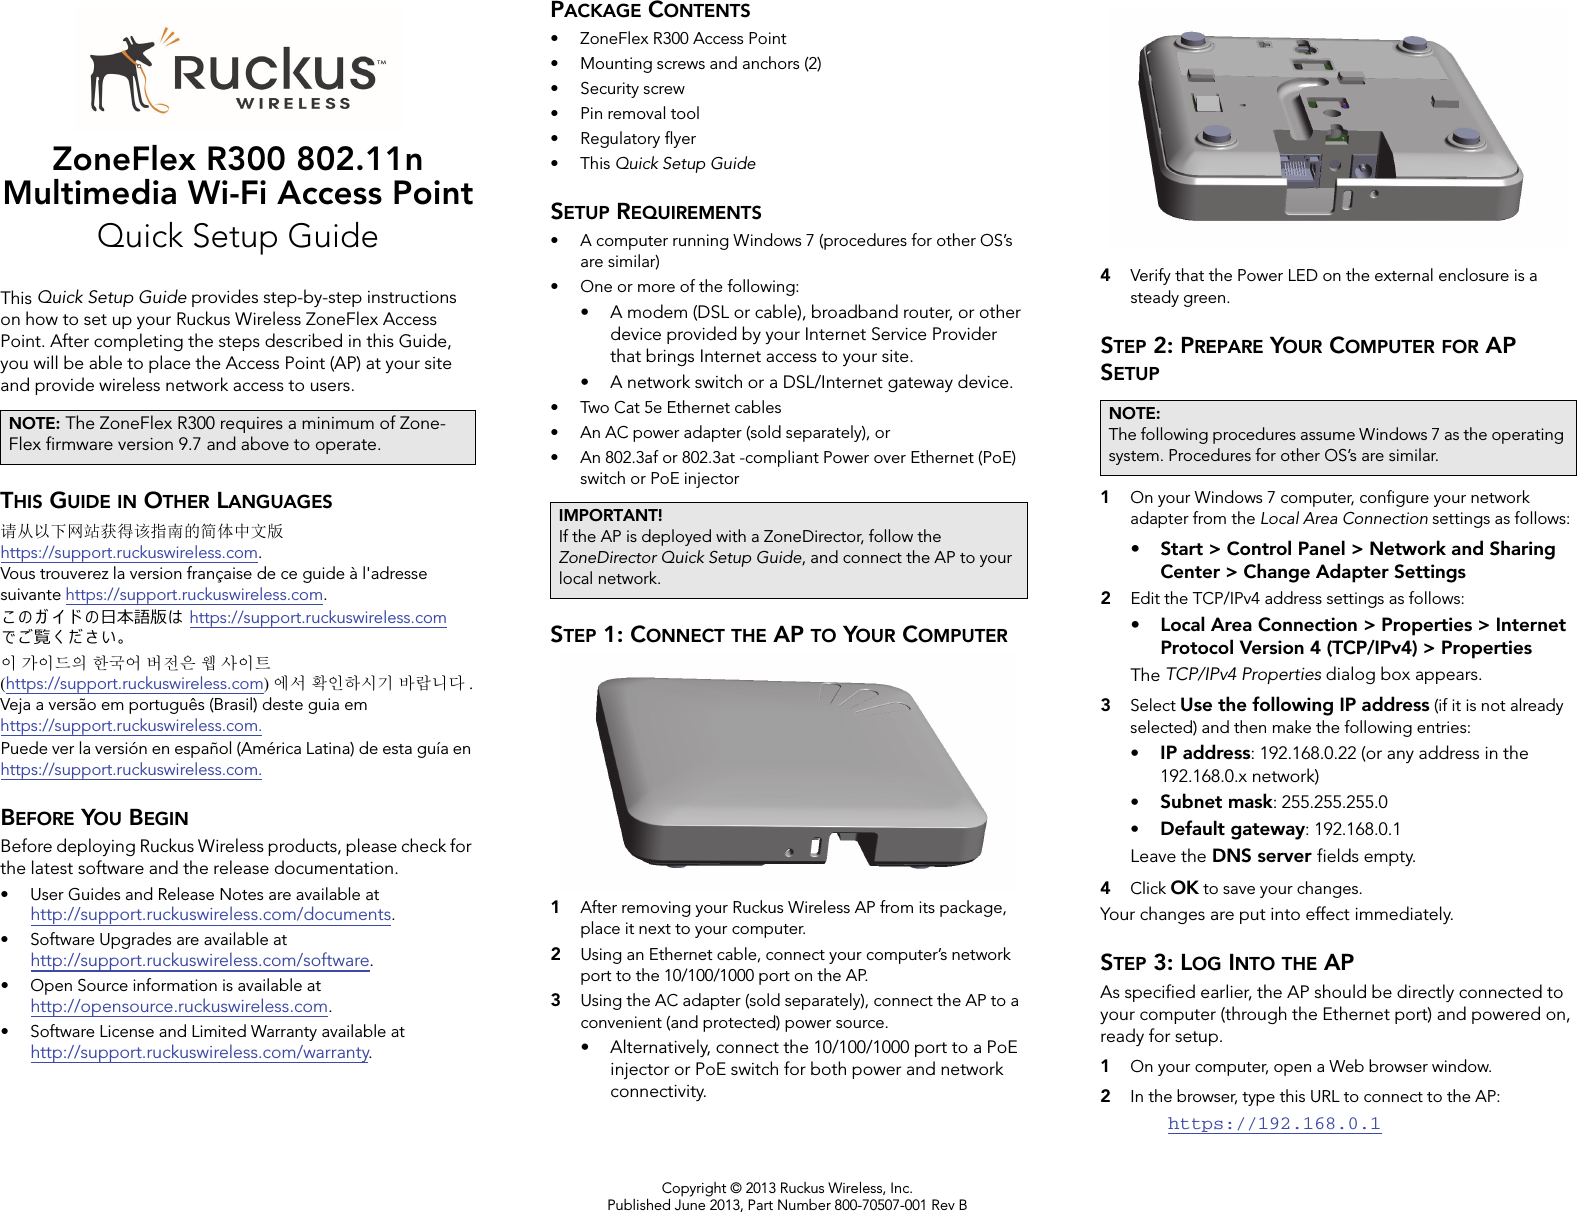 Copyright © 2013 Ruckus Wireless, Inc.Published June 2013, Part Number 800-70507-001 Rev BZoneFlex R300 802.11n Multimedia Wi-Fi Access PointQuick Setup GuideThis Quick Setup Guide provides step-by-step instructions on how to set up your Ruckus Wireless ZoneFlex Access Point. After completing the steps described in this Guide, you will be able to place the Access Point (AP) at your site and provide wireless network access to users.THIS GUIDE IN OTHER LANGUAGES请从以下网站获得该指南的简体中文版 https://support.ruckuswireless.com.Vous trouverez la version française de ce guide à l&apos;adresse suivante https://support.ruckuswireless.com.󴎾 󴏙 ガ イ ド 󴏙⽇本語版󴏚 https://support.ruckuswireless.com で󴎿覧く だ󴏀い。이 가이드의 한국어 버전은 웹 사이트(https://support.ruckuswireless.com)에서 확인하시기 바랍니다 .Veja a versão em português (Brasil) deste guia em https://support.ruckuswireless.com.Puede ver la versión en español (América Latina) de esta guía en https://support.ruckuswireless.com.BEFORE YOU BEGINBefore deploying Ruckus Wireless products, please check for the latest software and the release documentation.• User Guides and Release Notes are available at http://support.ruckuswireless.com/documents.• Software Upgrades are available athttp://support.ruckuswireless.com/software.• Open Source information is available athttp://opensource.ruckuswireless.com.• Software License and Limited Warranty available at http://support.ruckuswireless.com/warranty.PACKAGE CONTENTS• ZoneFlex R300 Access Point• Mounting screws and anchors (2)• Security screw• Pin removal tool• Regulatory flyer•This Quick Setup GuideSETUP REQUIREMENTS• A computer running Windows 7 (procedures for other OS’s are similar)• One or more of the following:• A modem (DSL or cable), broadband router, or other device provided by your Internet Service Provider that brings Internet access to your site. • A network switch or a DSL/Internet gateway device.• Two Cat 5e Ethernet cables• An AC power adapter (sold separately), or• An 802.3af or 802.3at -compliant Power over Ethernet (PoE) switch or PoE injector  STEP 1: CONNECT THE AP TO YOUR COMPUTER1After removing your Ruckus Wireless AP from its package, place it next to your computer.2Using an Ethernet cable, connect your computer’s network port to the 10/100/1000 port on the AP. 3Using the AC adapter (sold separately), connect the AP to a convenient (and protected) power source. • Alternatively, connect the 10/100/1000 port to a PoE injector or PoE switch for both power and network connectivity.4Verify that the Power LED on the external enclosure is a steady green. STEP 2: PREPARE YOUR COMPUTER FOR AP SETUP1On your Windows 7 computer, configure your network adapter from the Local Area Connection settings as follows:• Start &gt; Control Panel &gt; Network and Sharing Center &gt; Change Adapter Settings2Edit the TCP/IPv4 address settings as follows: • Local Area Connection &gt; Properties &gt; Internet Protocol Version 4 (TCP/IPv4) &gt; PropertiesThe TCP/IPv4 Properties dialog box appears.3Select Use the following IP address (if it is not already selected) and then make the following entries:•IP address: 192.168.0.22 (or any address in the 192.168.0.x network)•Subnet mask: 255.255.255.0•Default gateway: 192.168.0.1Leave the DNS server fields empty.4Click OK to save your changes.Your changes are put into effect immediately. STEP 3: LOG INTO THE APAs specified earlier, the AP should be directly connected to your computer (through the Ethernet port) and powered on, ready for setup.1On your computer, open a Web browser window.2In the browser, type this URL to connect to the AP: https://192.168.0.1NOTE: The ZoneFlex R300 requires a minimum of Zone-Flex firmware version 9.7 and above to operate. IMPORTANT!If the AP is deployed with a ZoneDirector, follow the ZoneDirector Quick Setup Guide, and connect the AP to your local network.NOTE:The following procedures assume Windows 7 as the operating system. Procedures for other OS’s are similar.